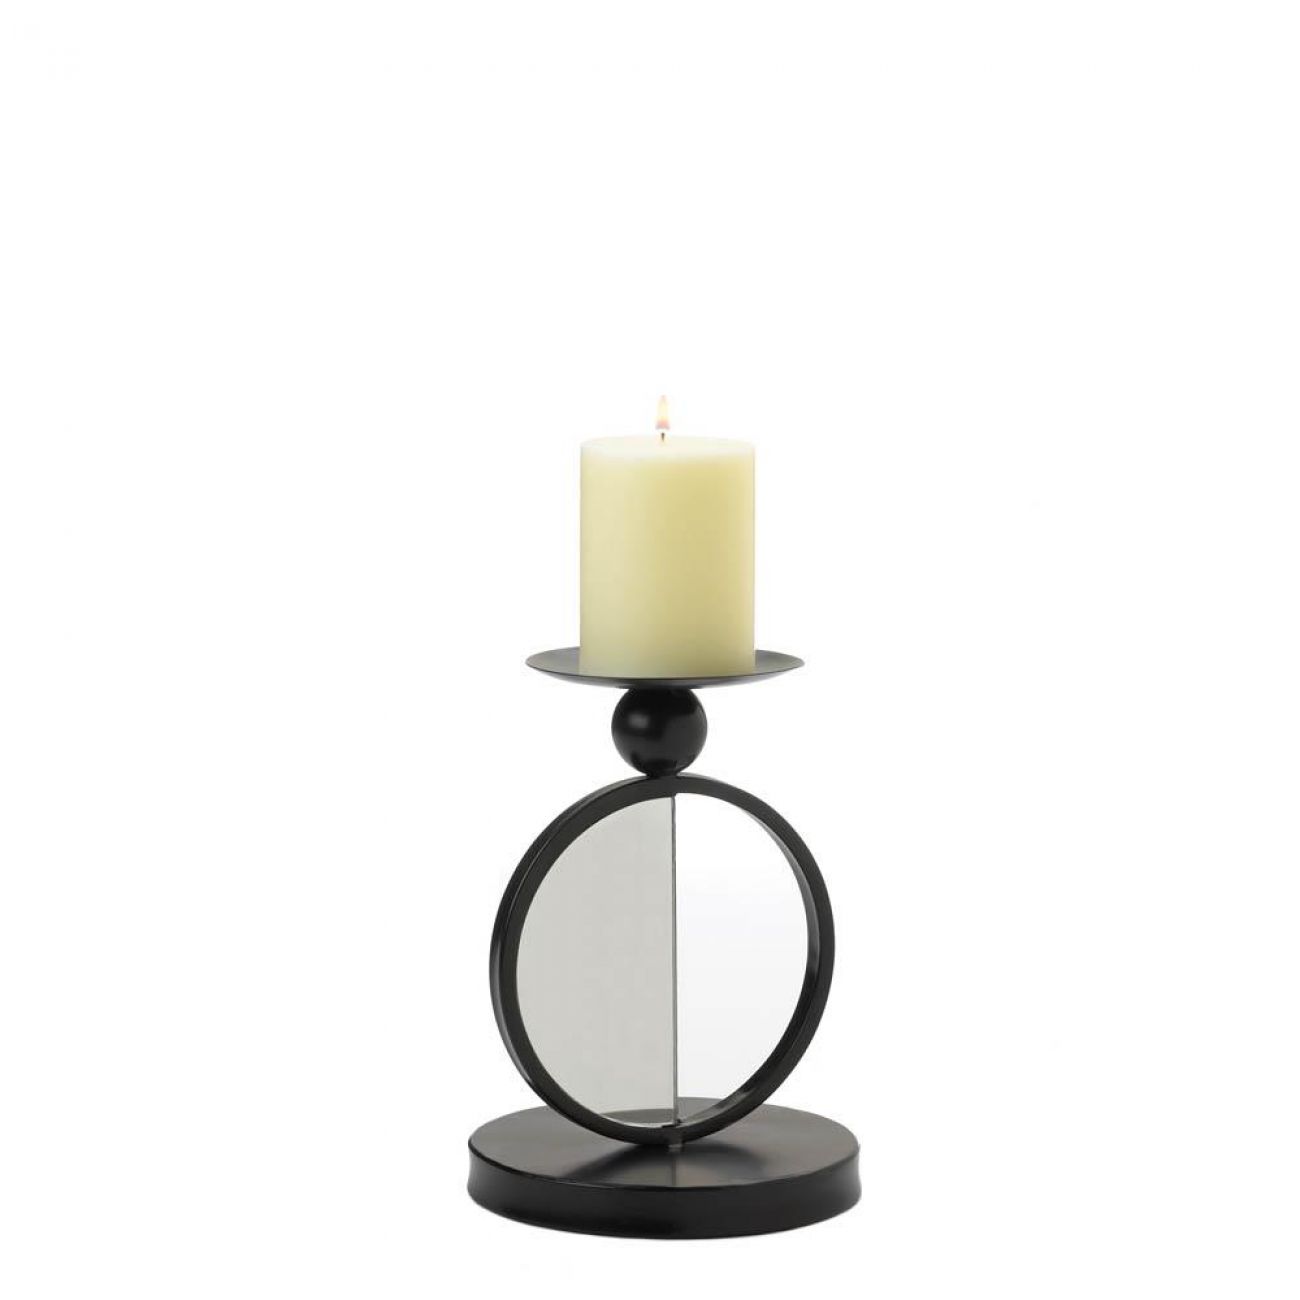 Single Mirrored Candle Holder